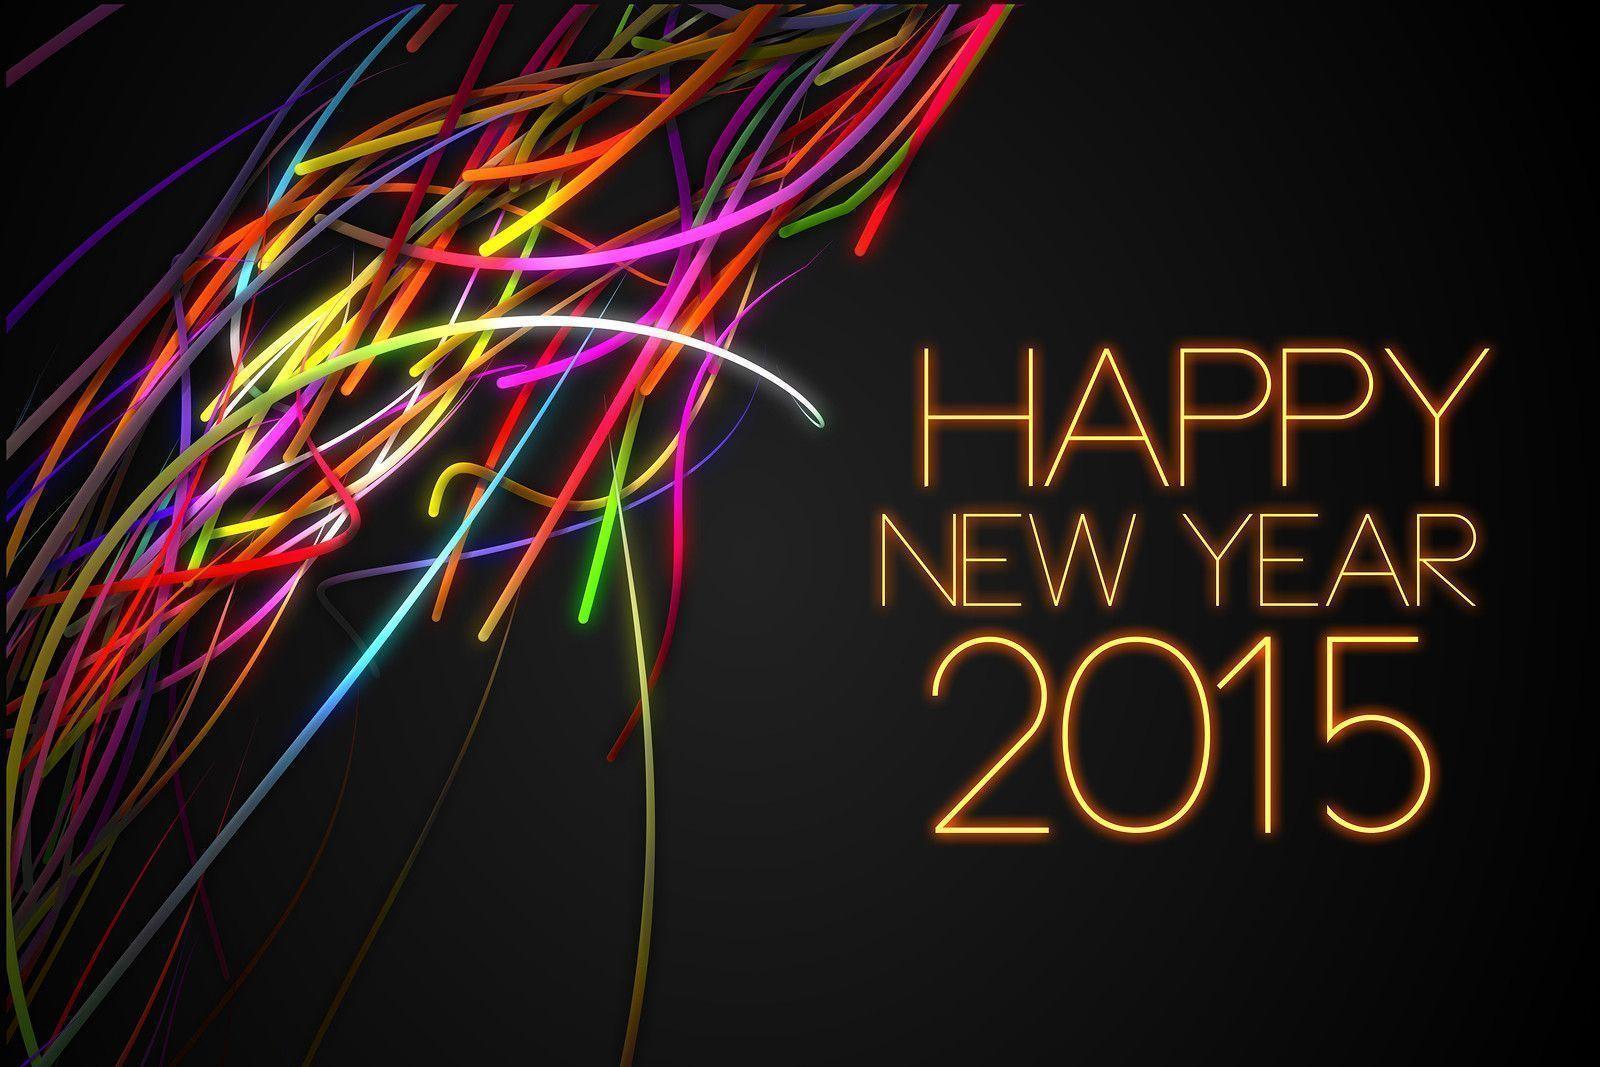 Happy New Year 2015 Image, Wallpaper, Facebook Cover